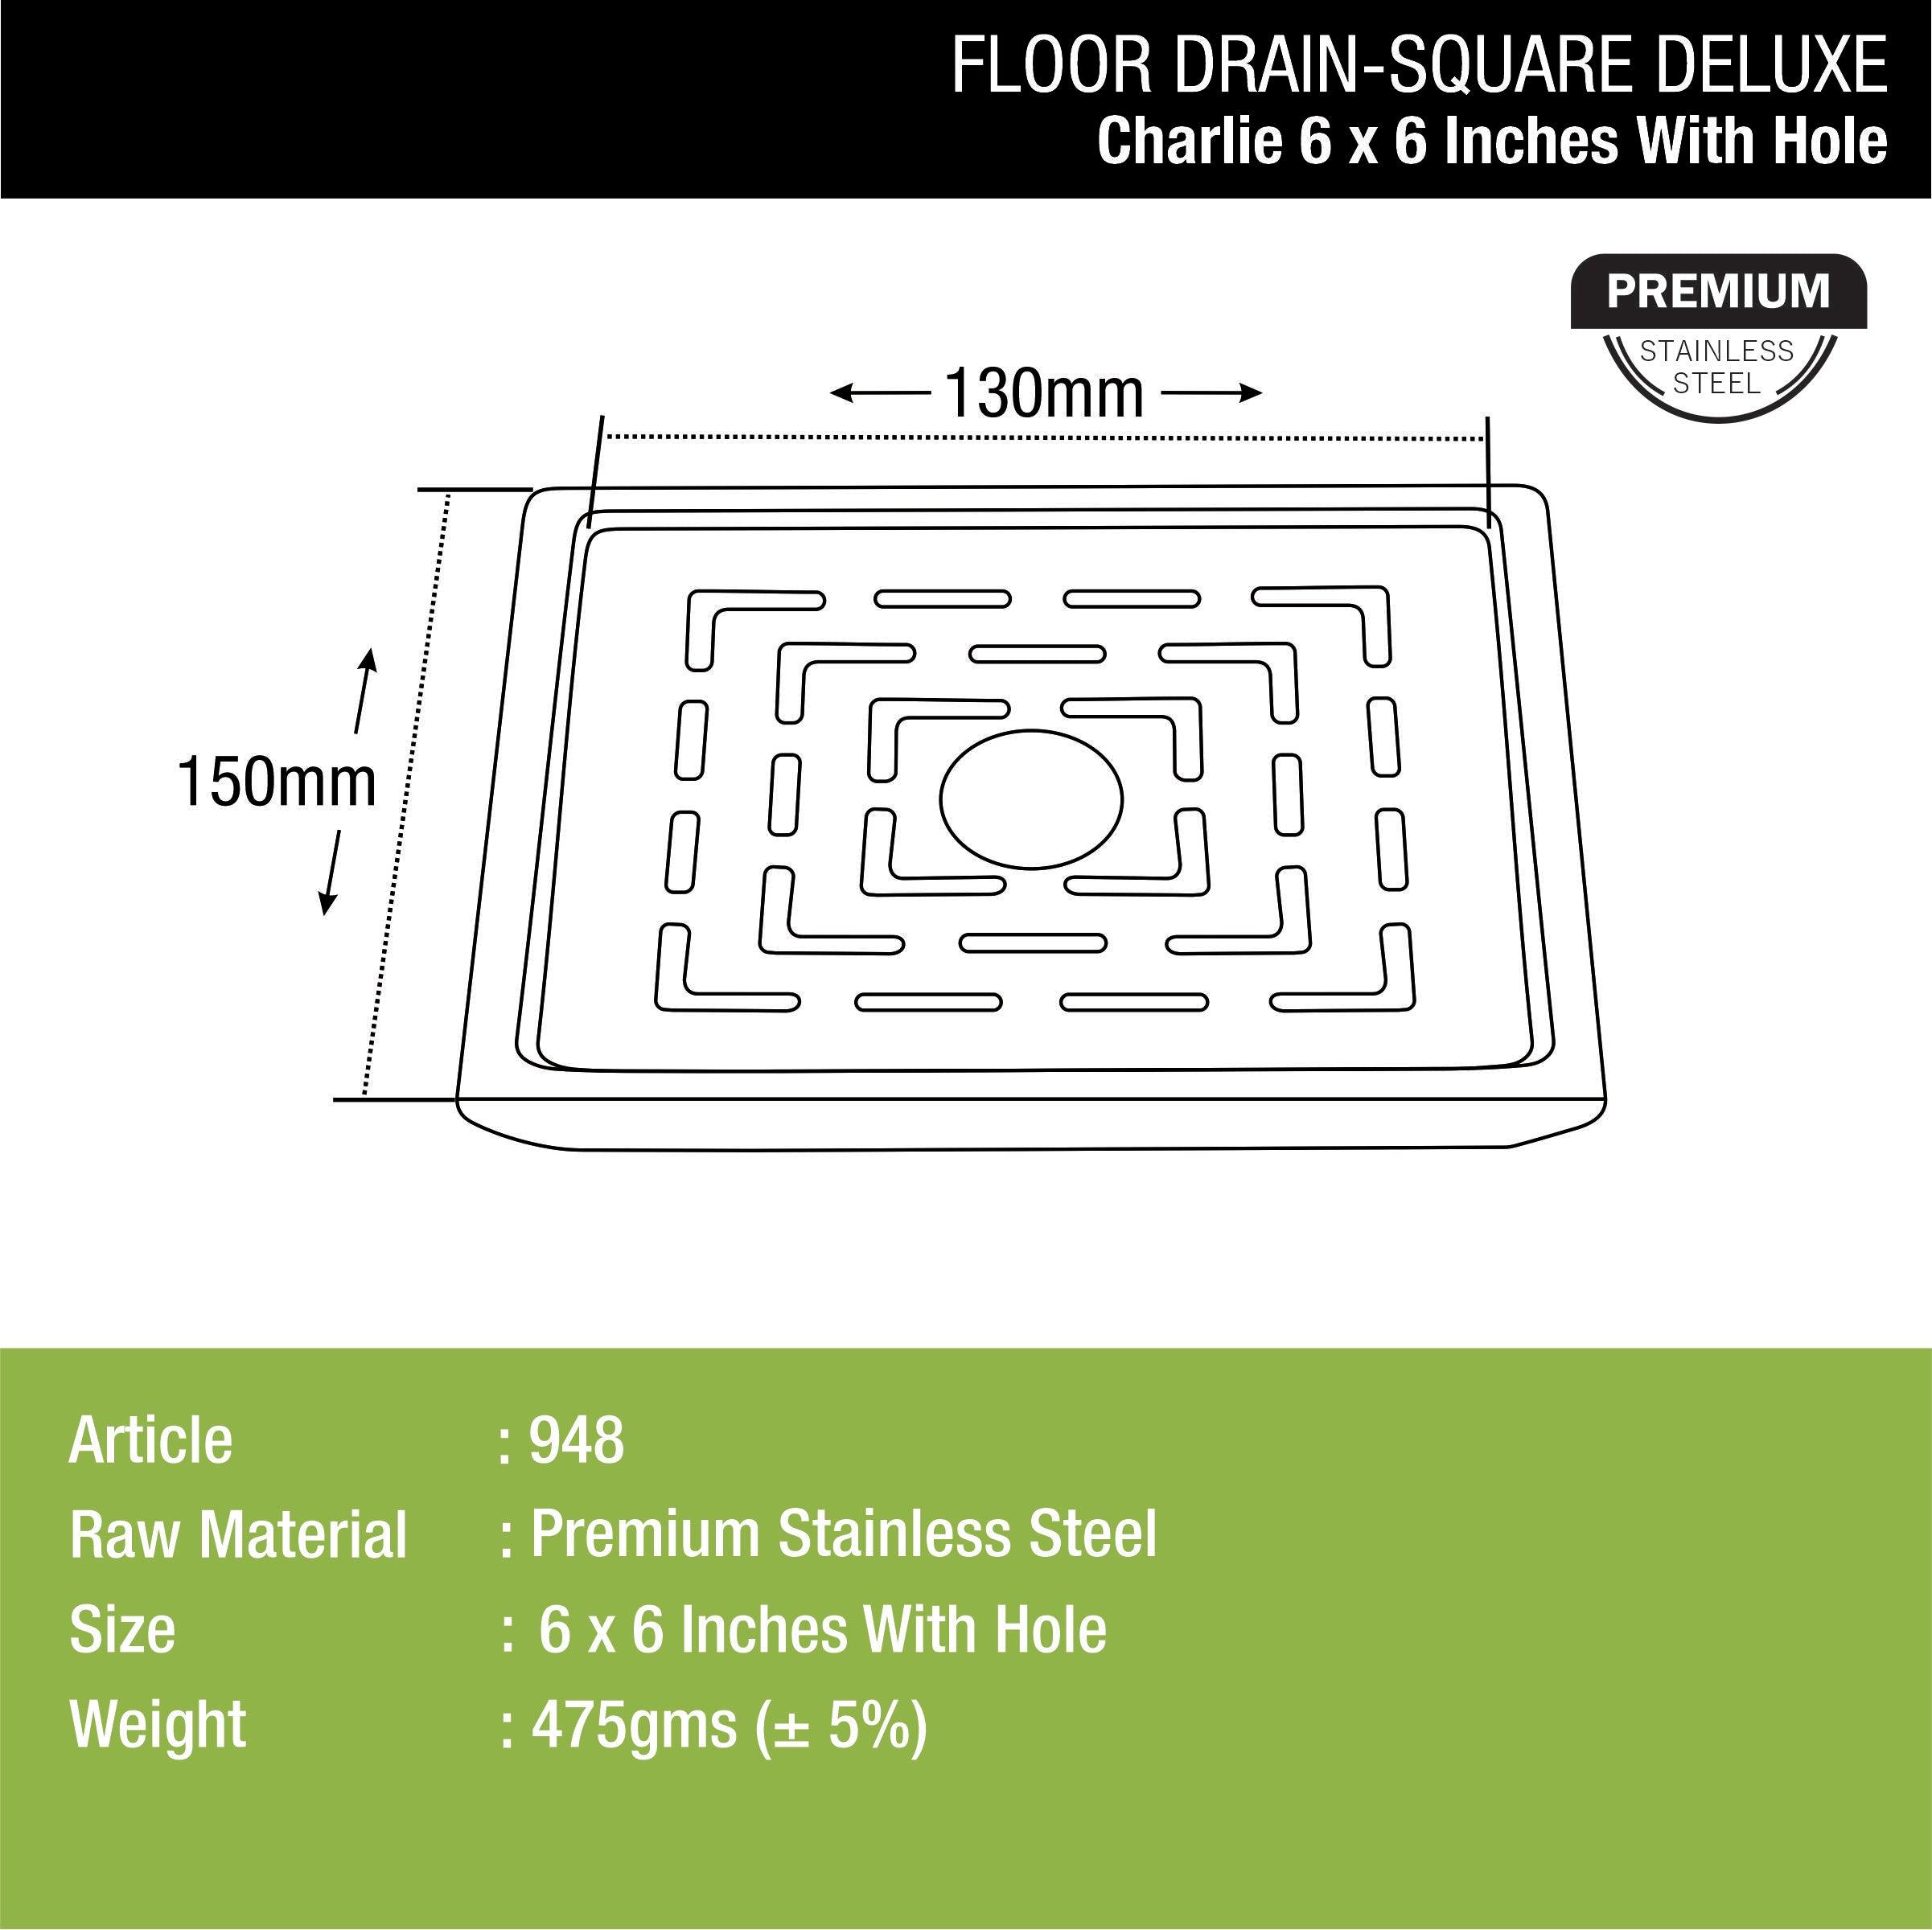 Charlie Deluxe Square Floor Drain (6 x 6 Inches) with Hole dimensions and sizes